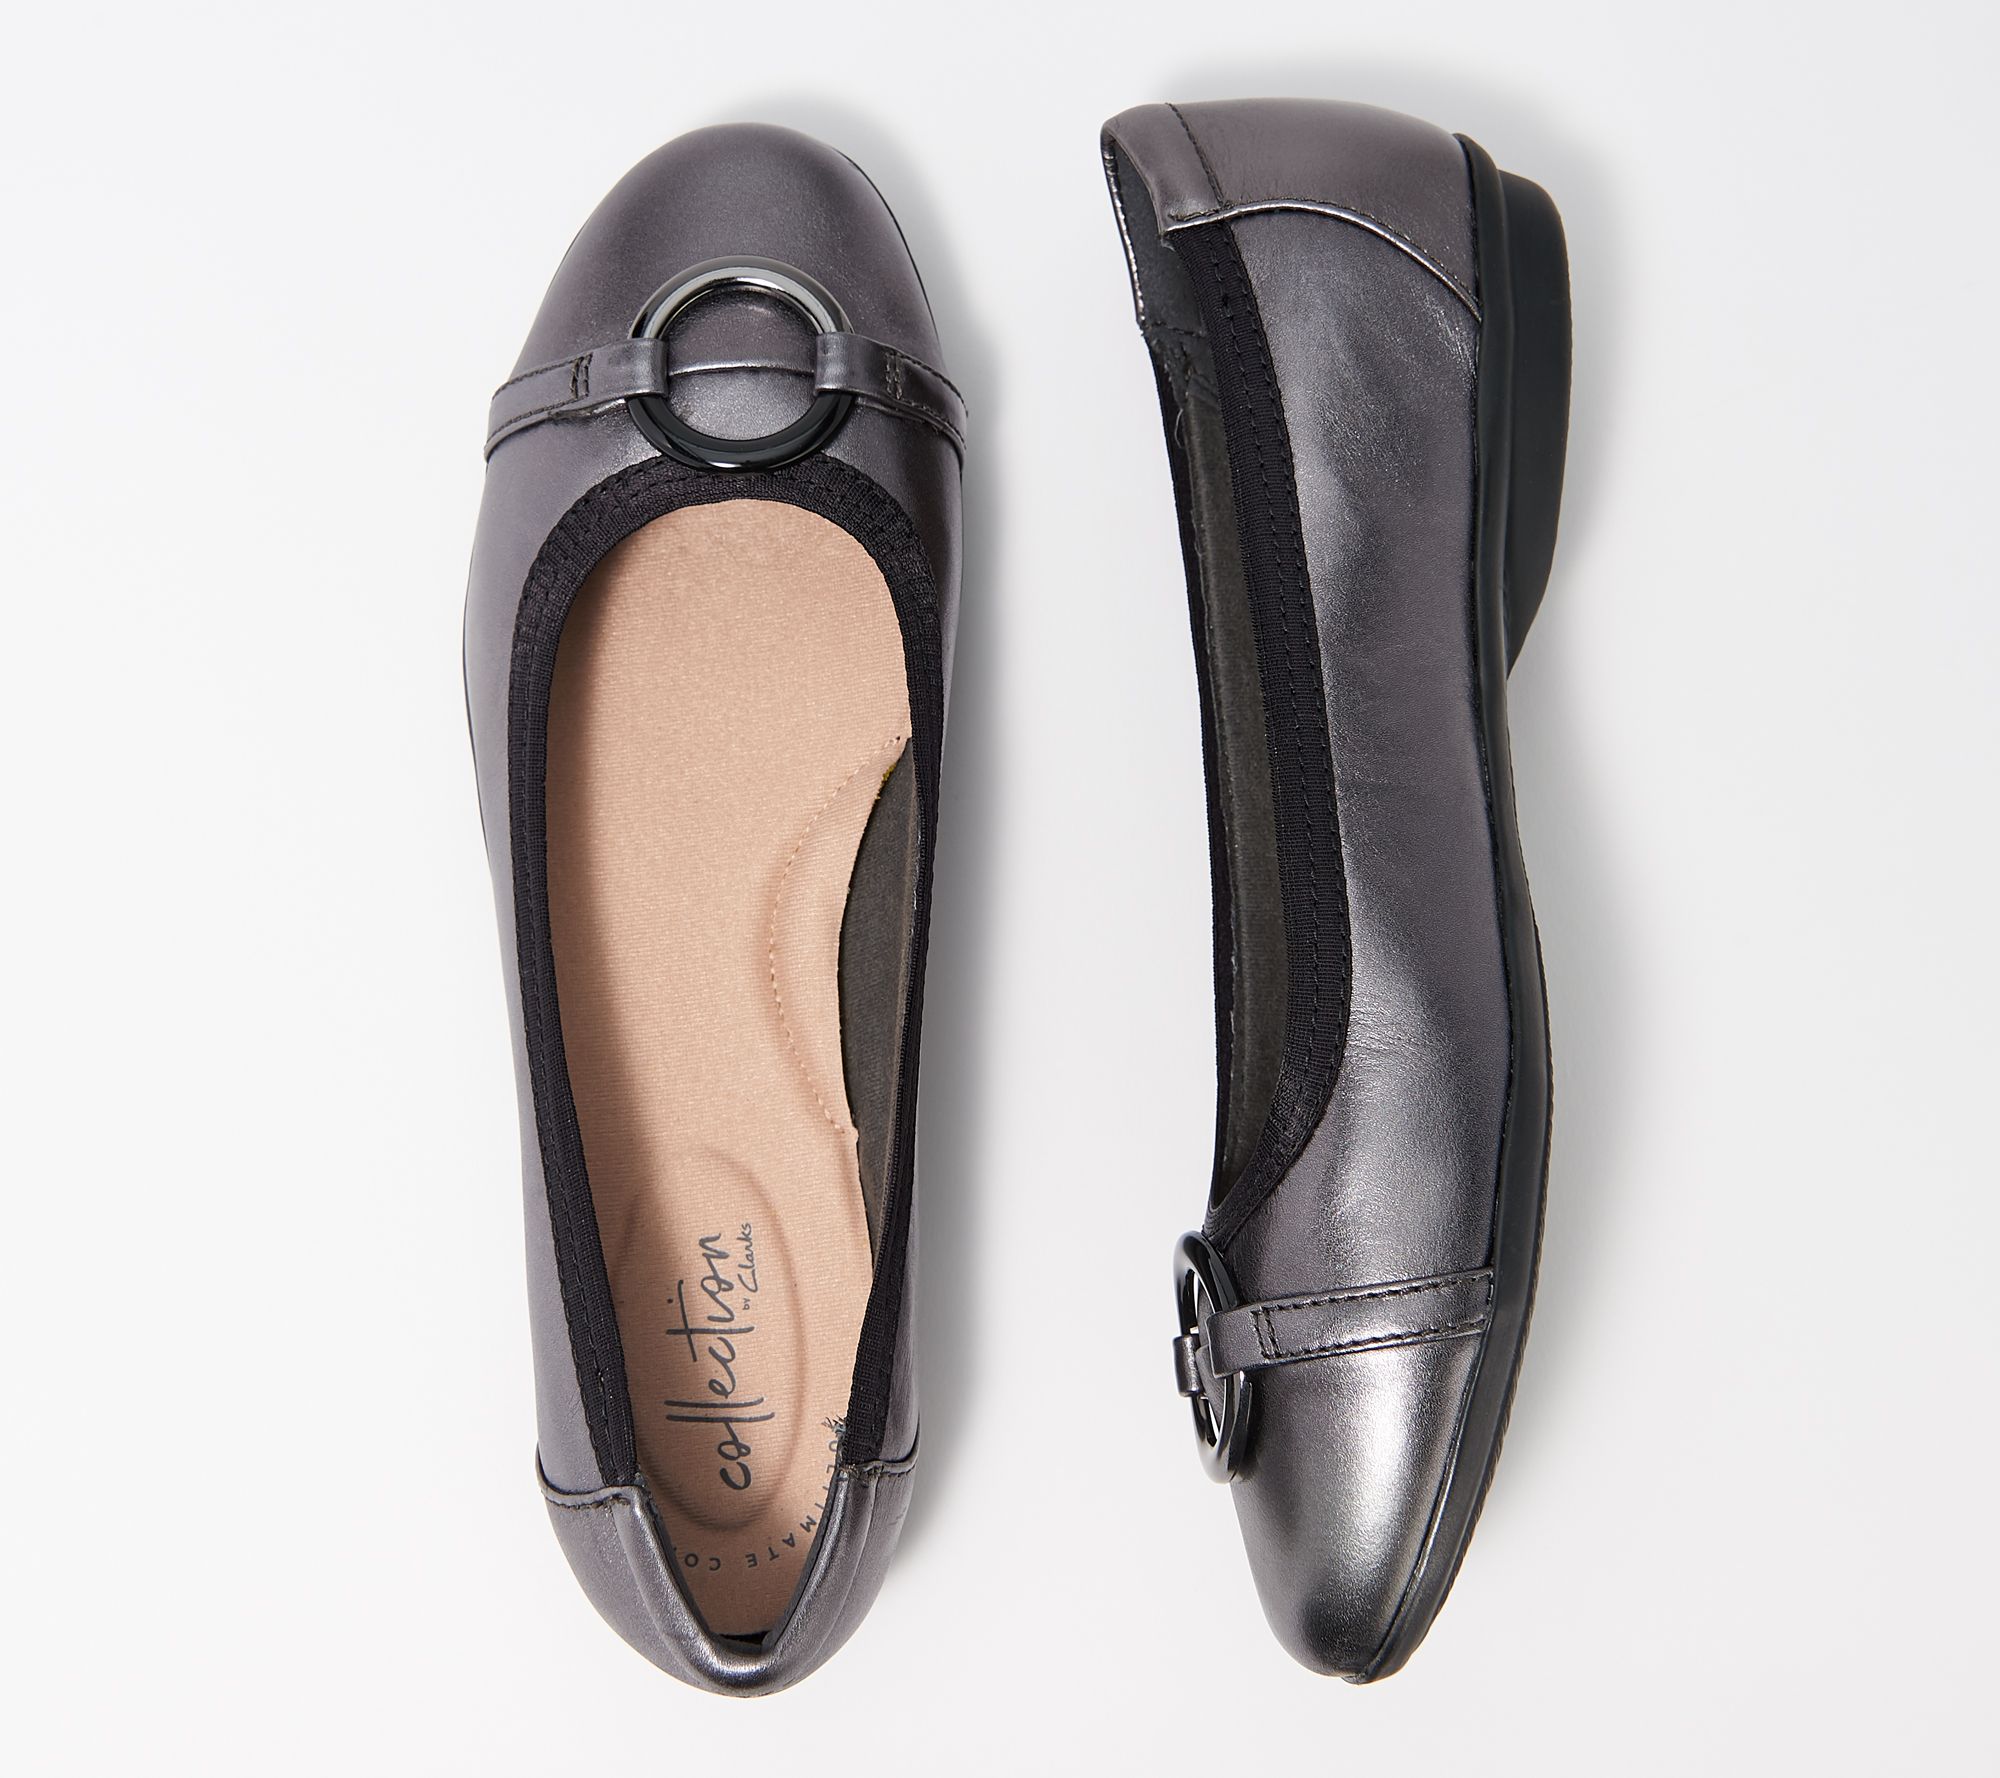 clarks silver flat shoes